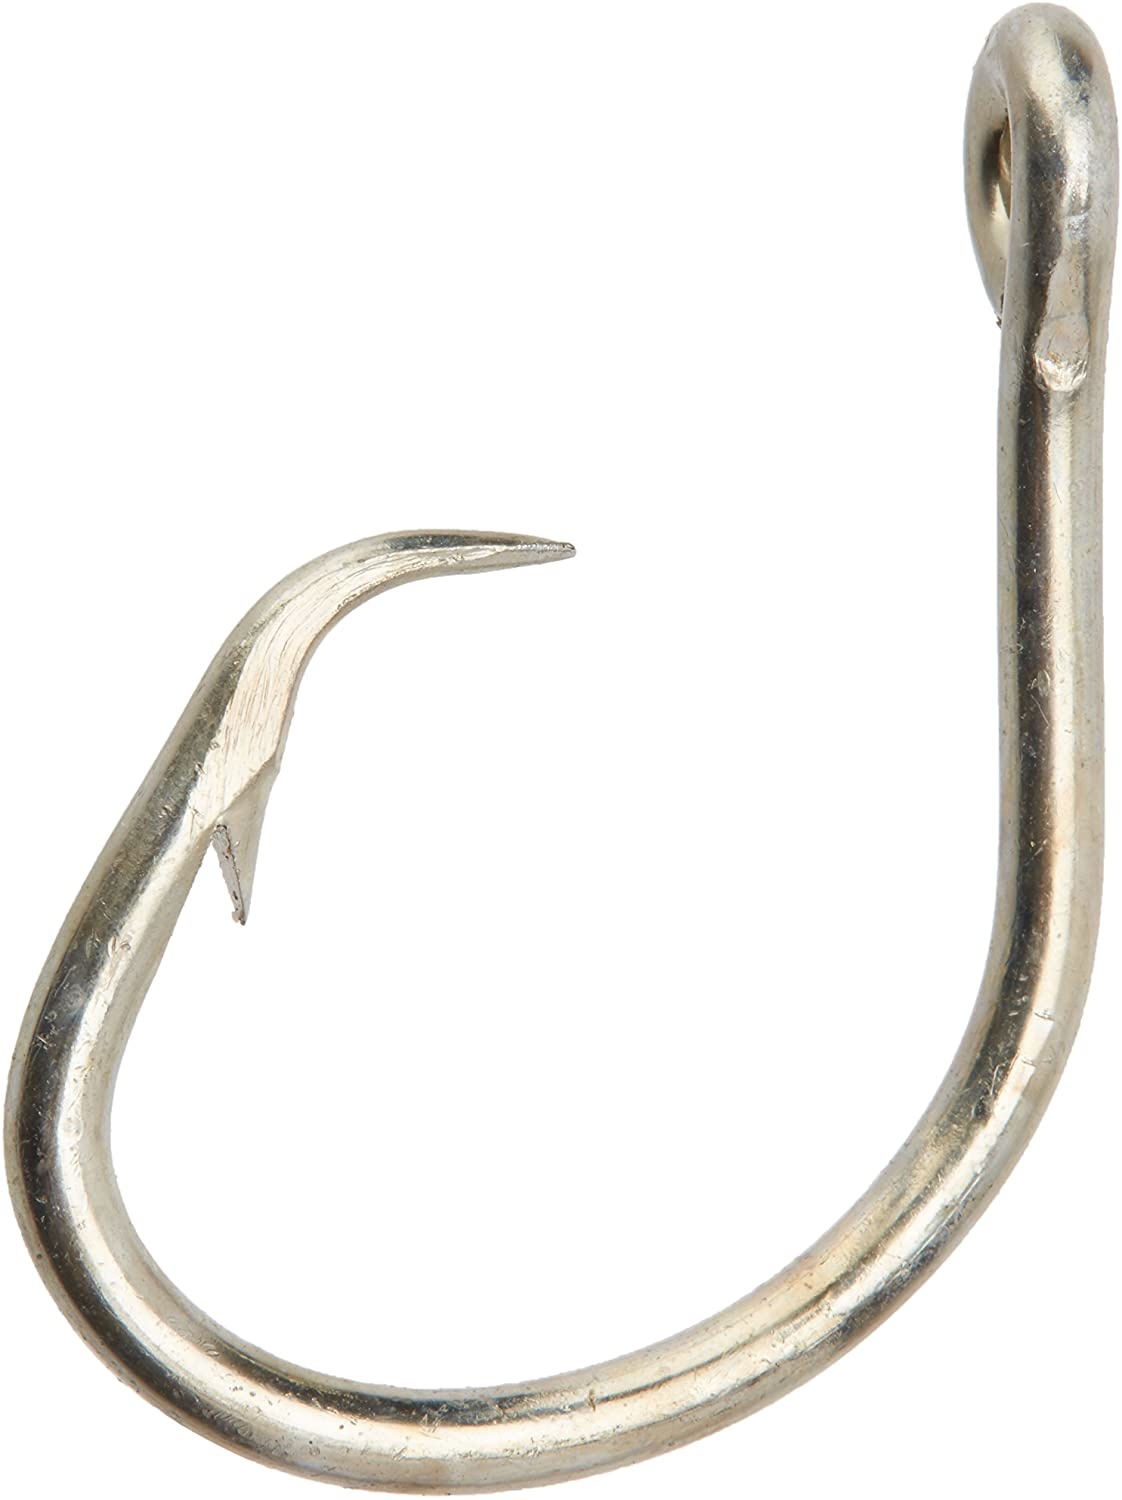 Offshore Angler Wide-Gap Circle Hooks